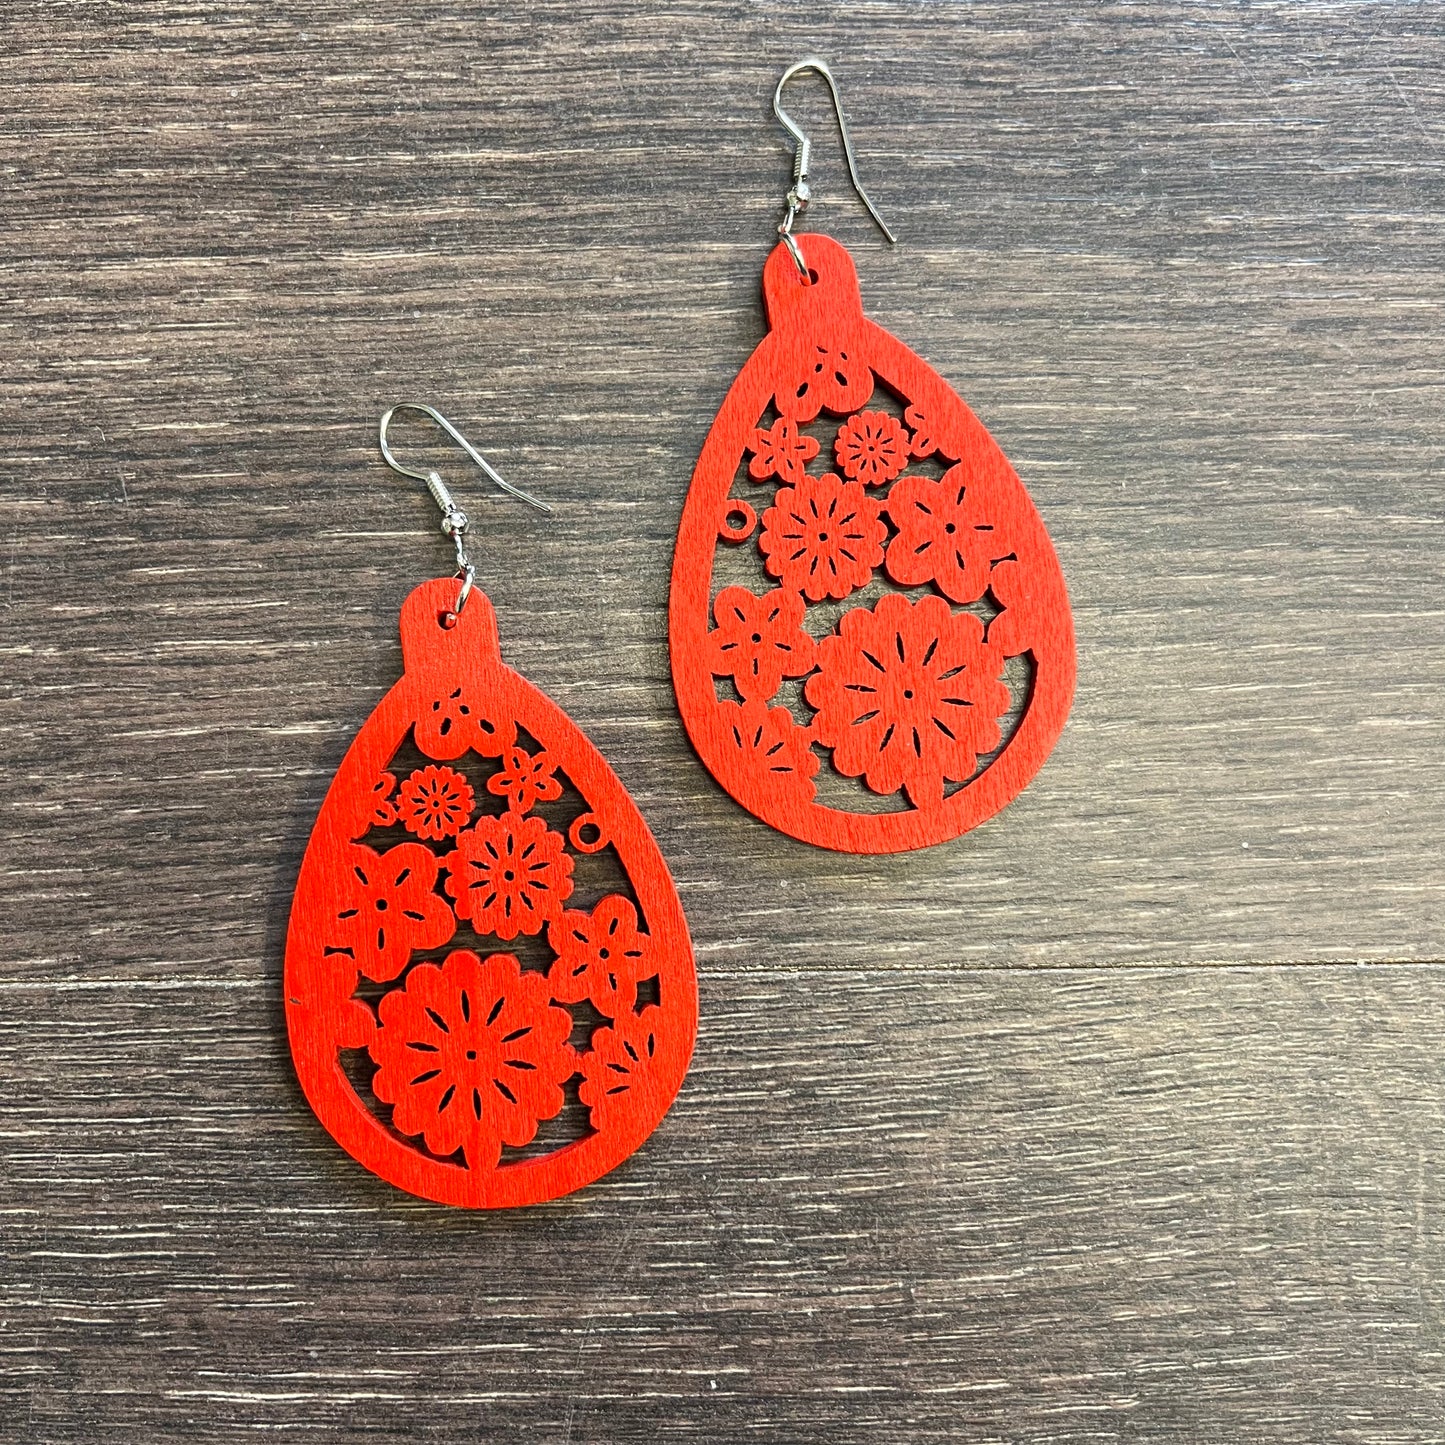 Wooden Floral Earrings - Red